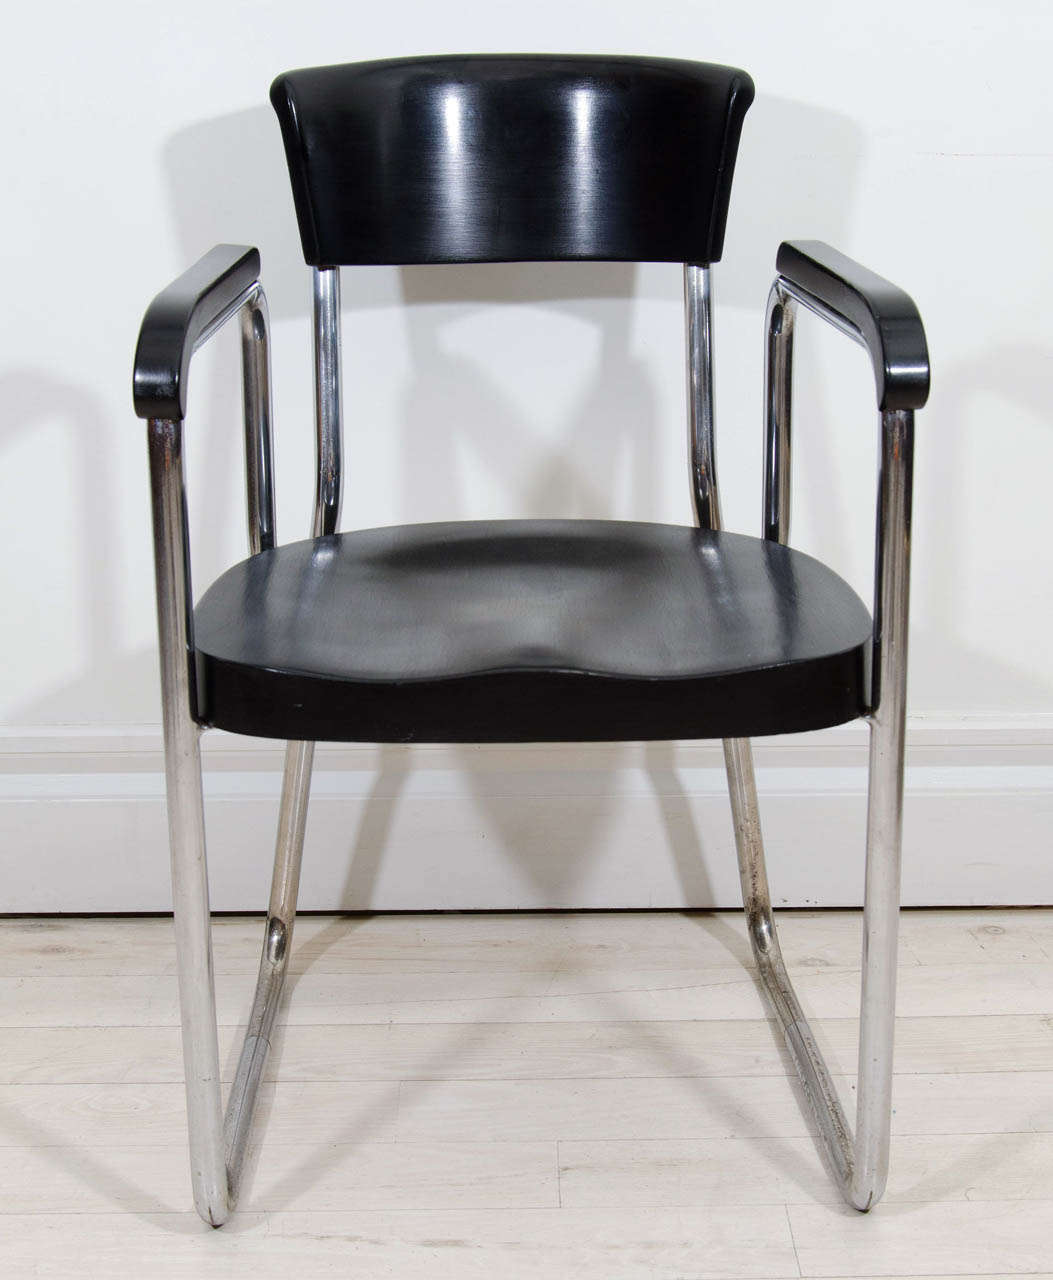 Tubular steel and black lacquer desk chair by Emile Guillot executed by Thonet (with authenticating plaque)